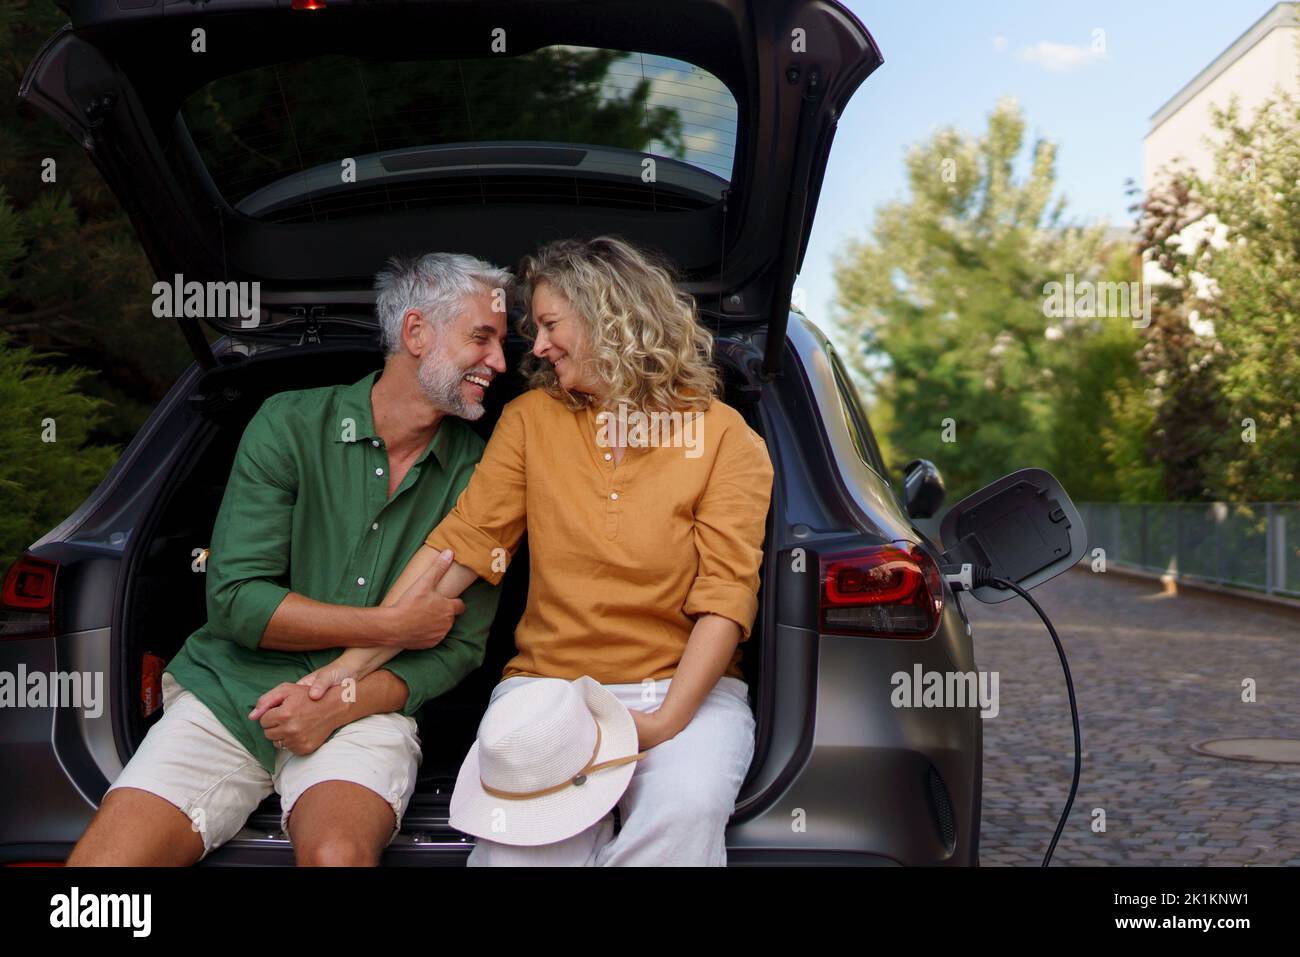 Middle-aged couple sitting in trunk while waiting for charging car before travelling on summer holiday. Stock Photo